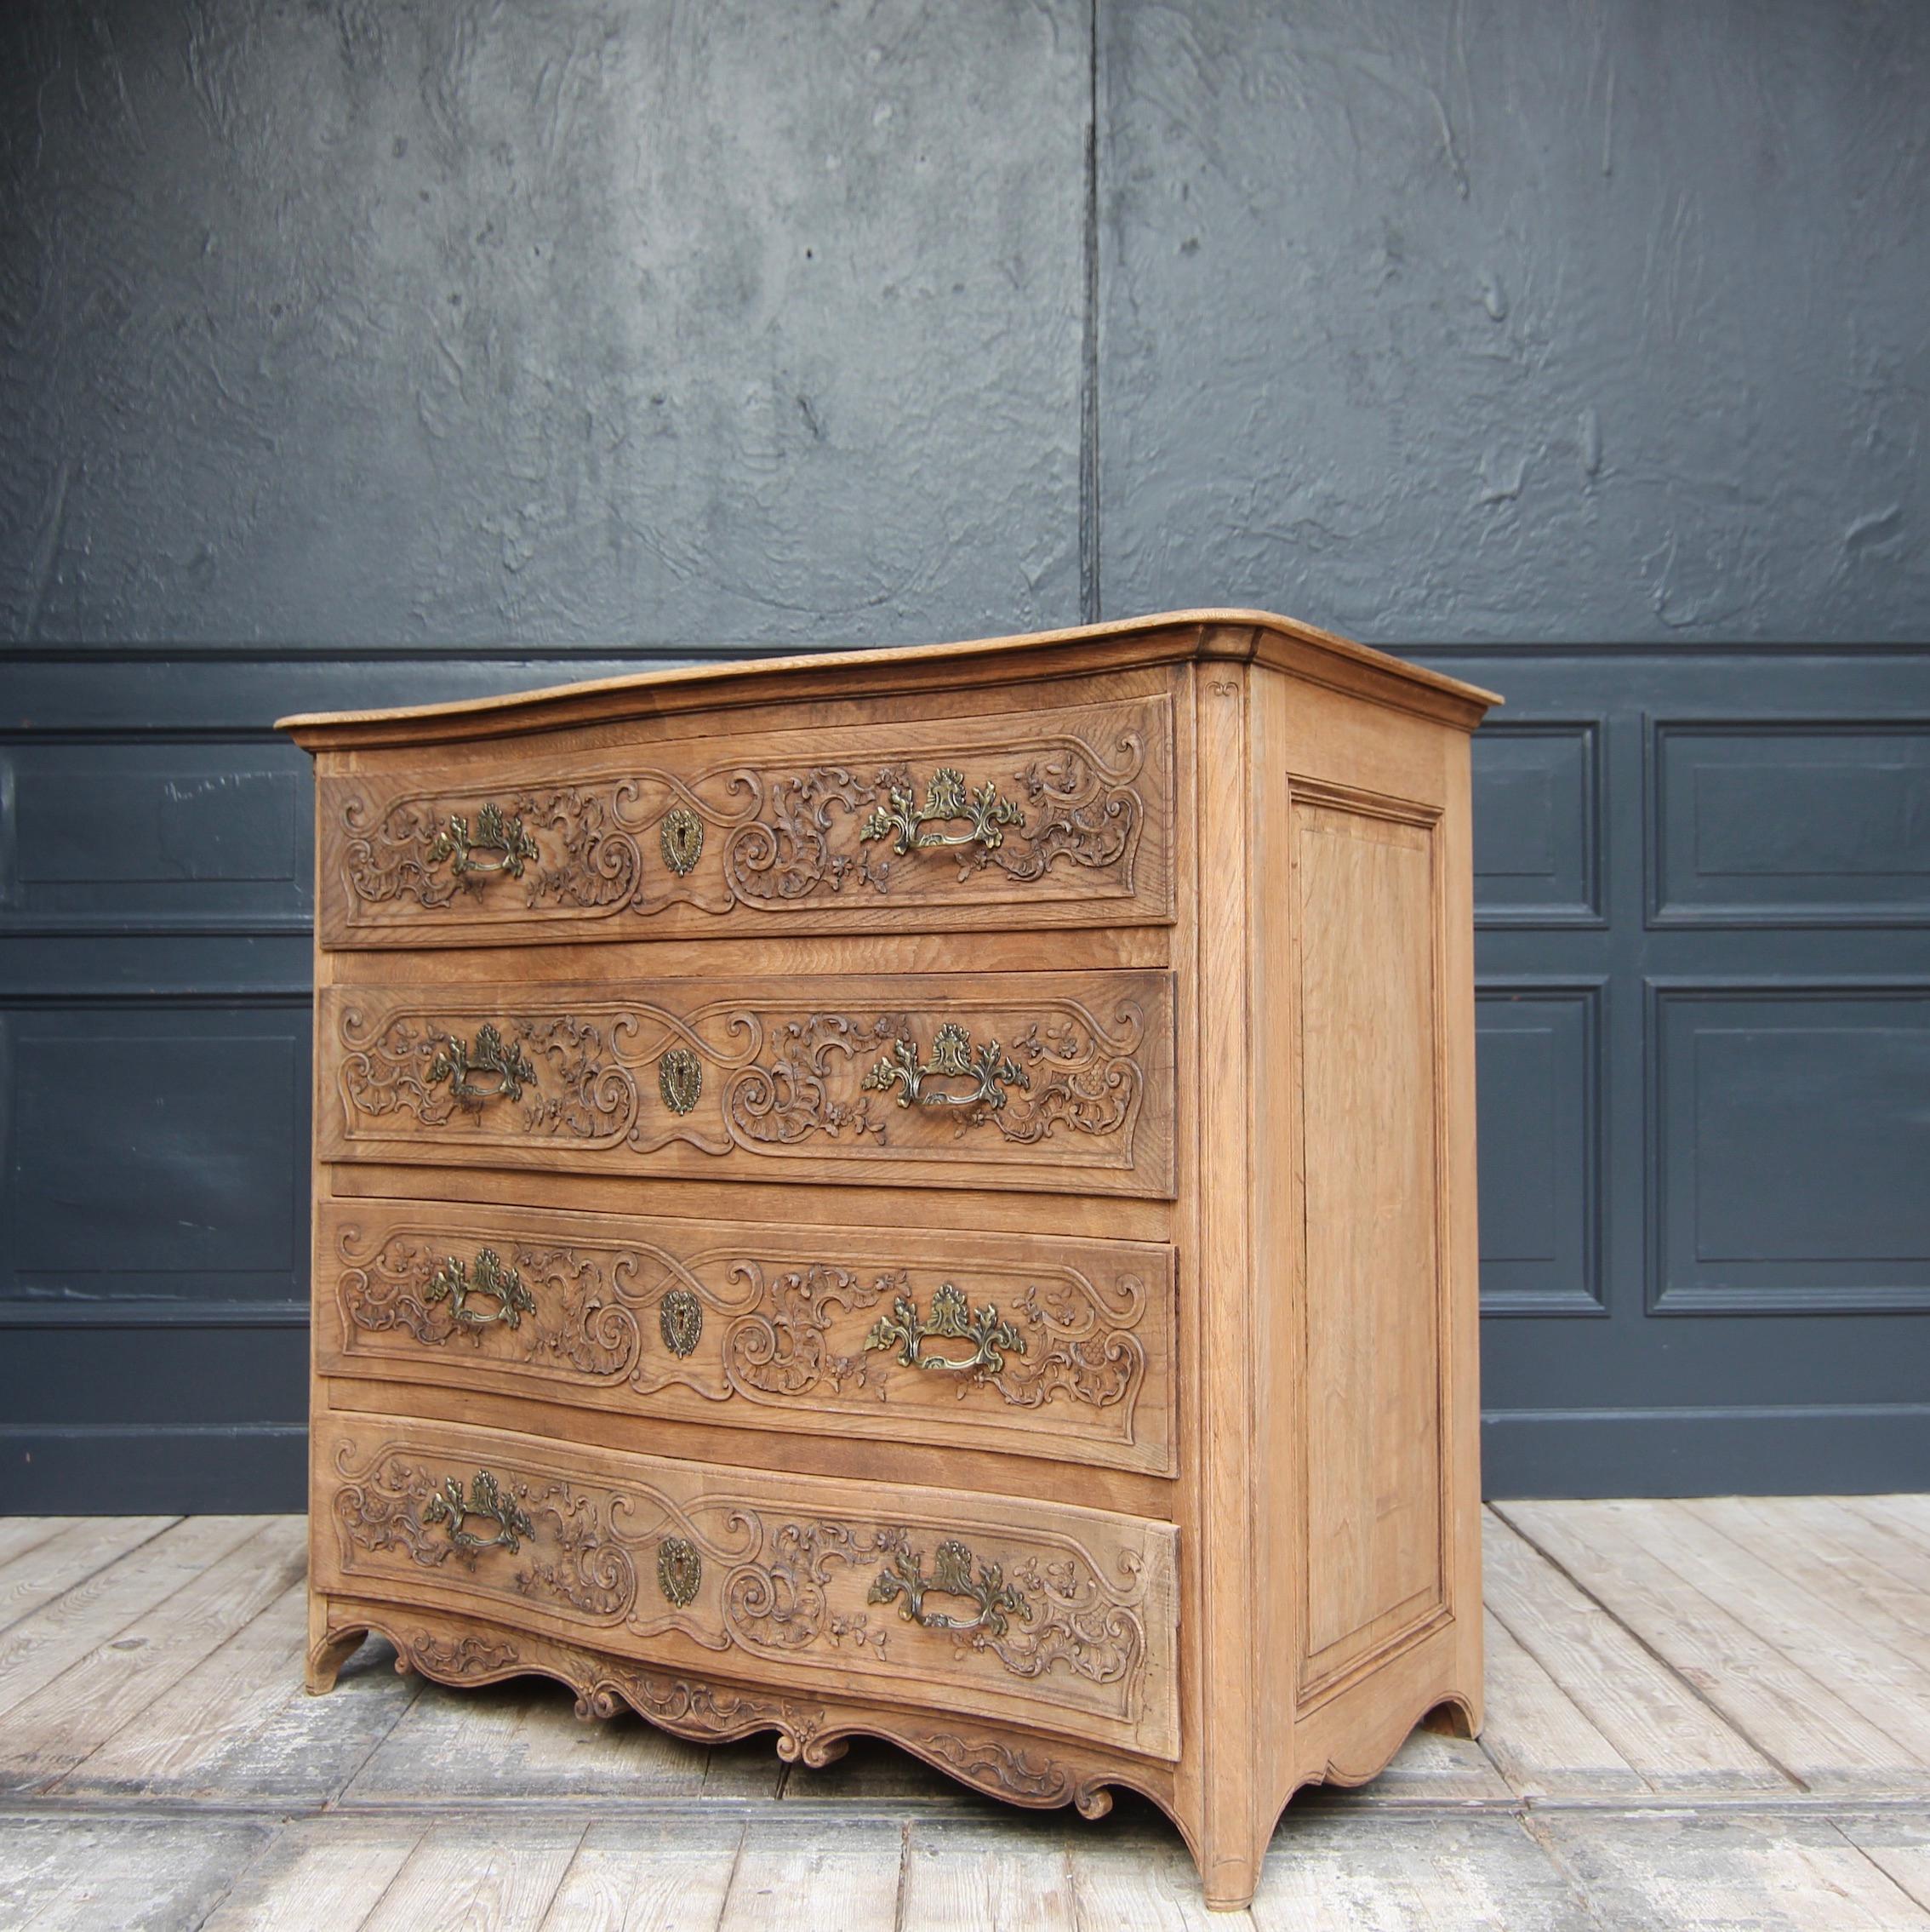 Elegant baroque style chest of drawers from the early 20th century. Made of solid oak wood and carved. 

Laterally coffered four-bay oak body with rounded corners and slightly curved front, as well as a matching moulded top panel and multiple curved